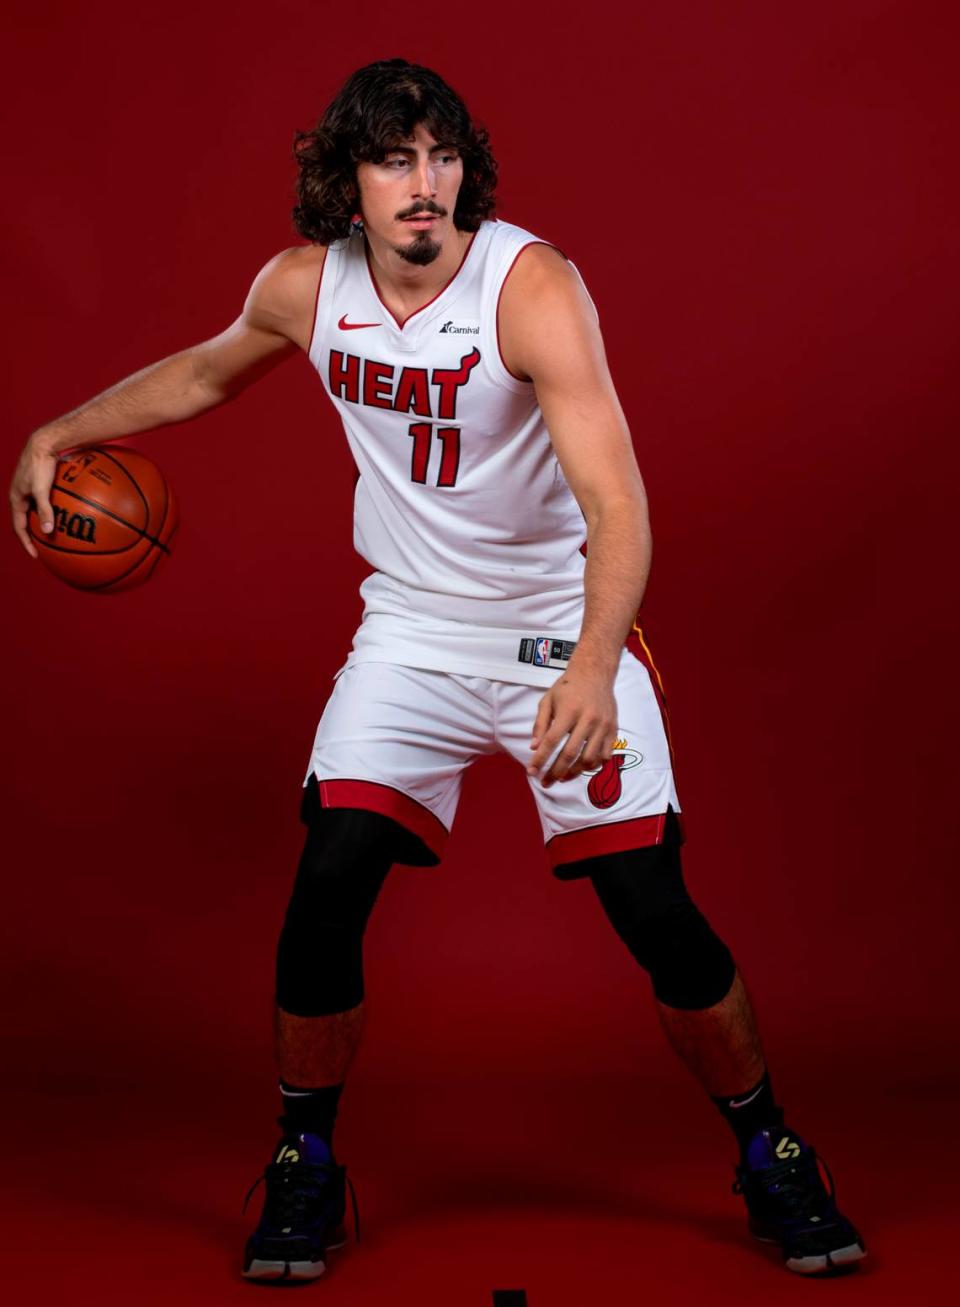 Miami Heat guard Jaime Jaquez Jr. (11) is photographed during team Media Day at the Kaseya Center on Monday, Oct. 2, 2023, in Miami, Fla.